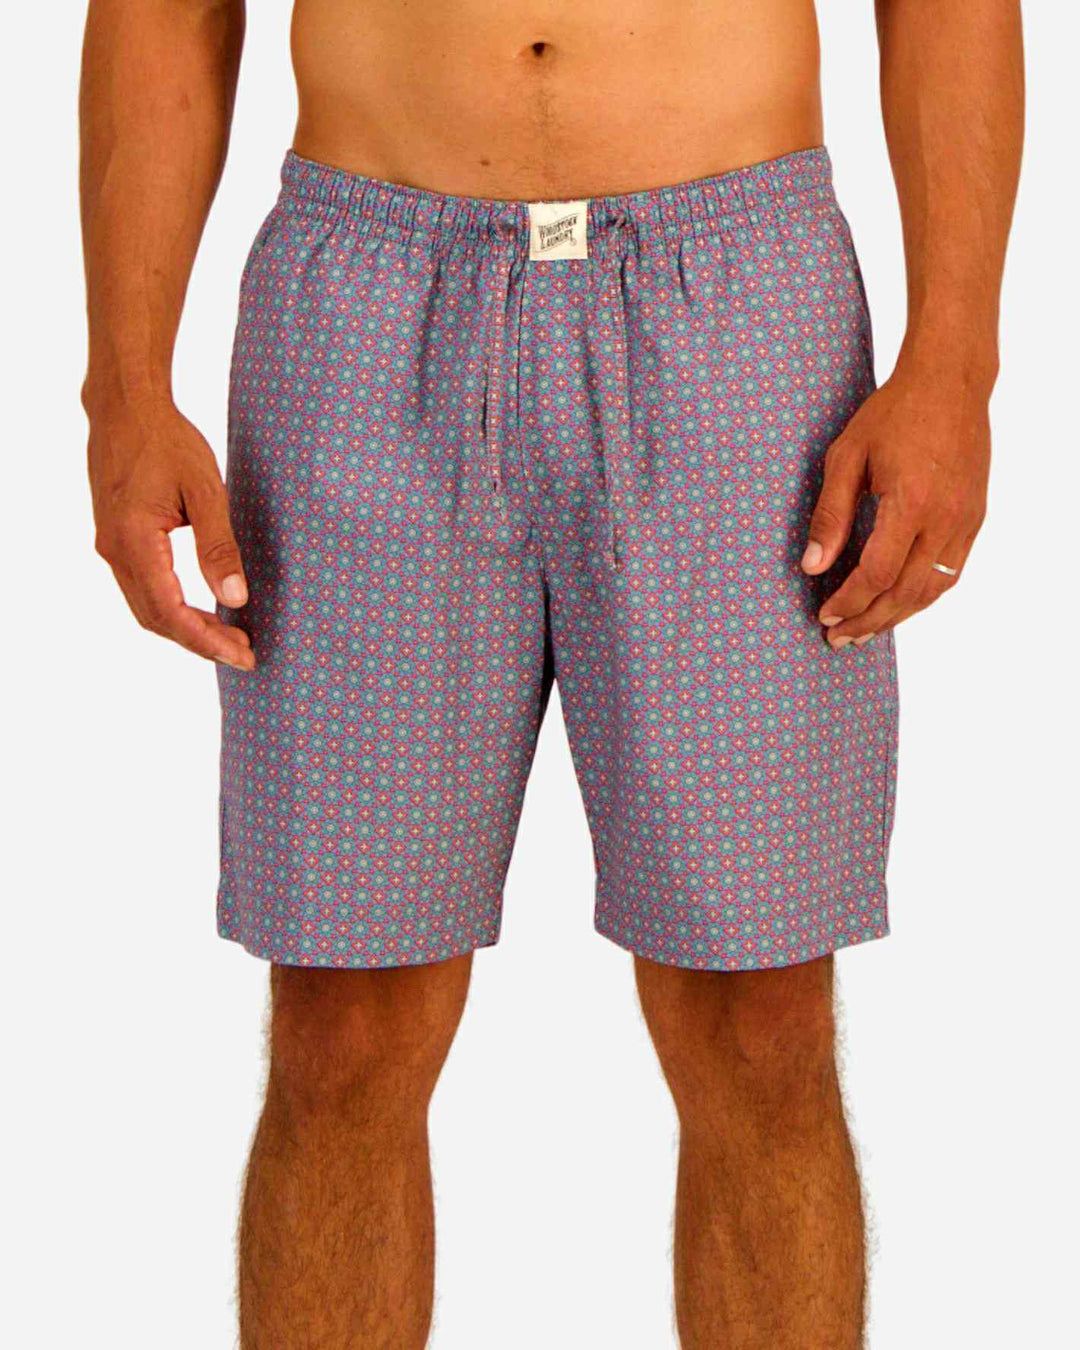 Mens lounge shorts with a moroccoo pattern